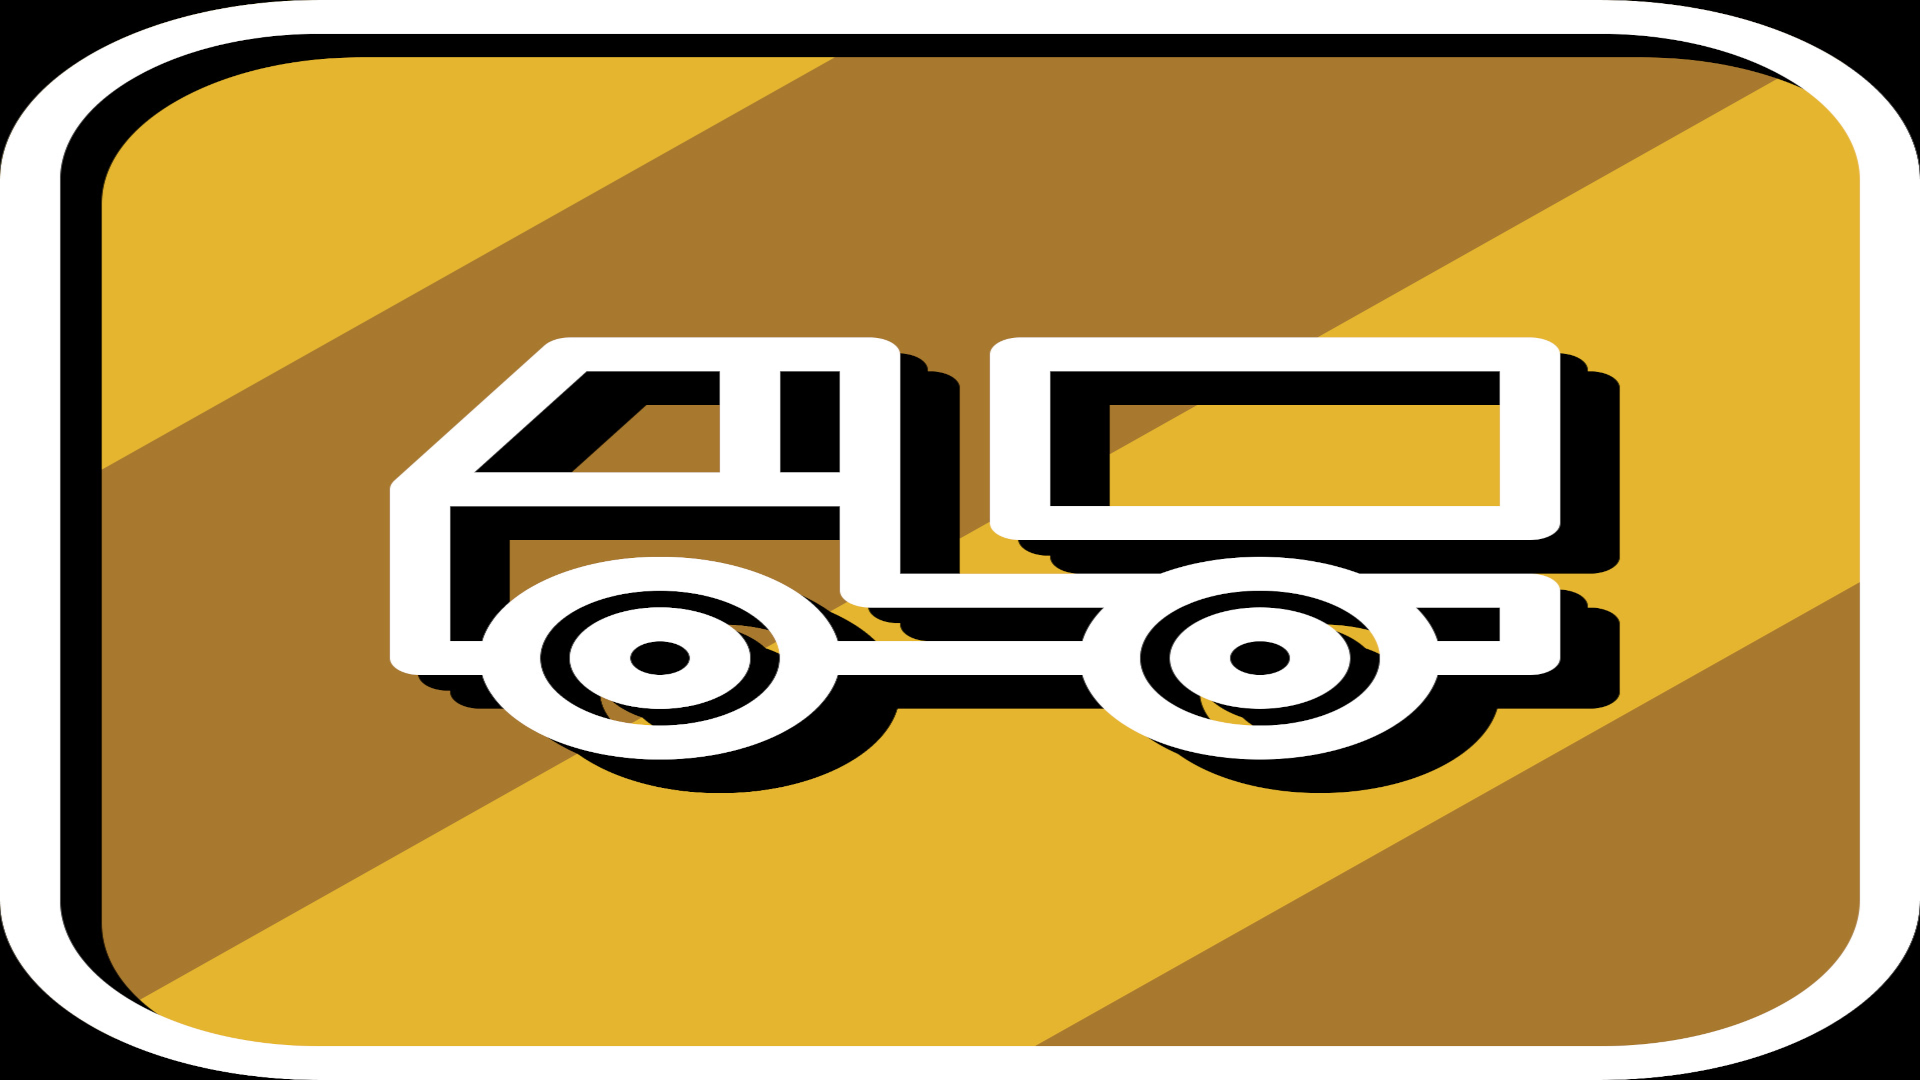 Icon for Cargo truck